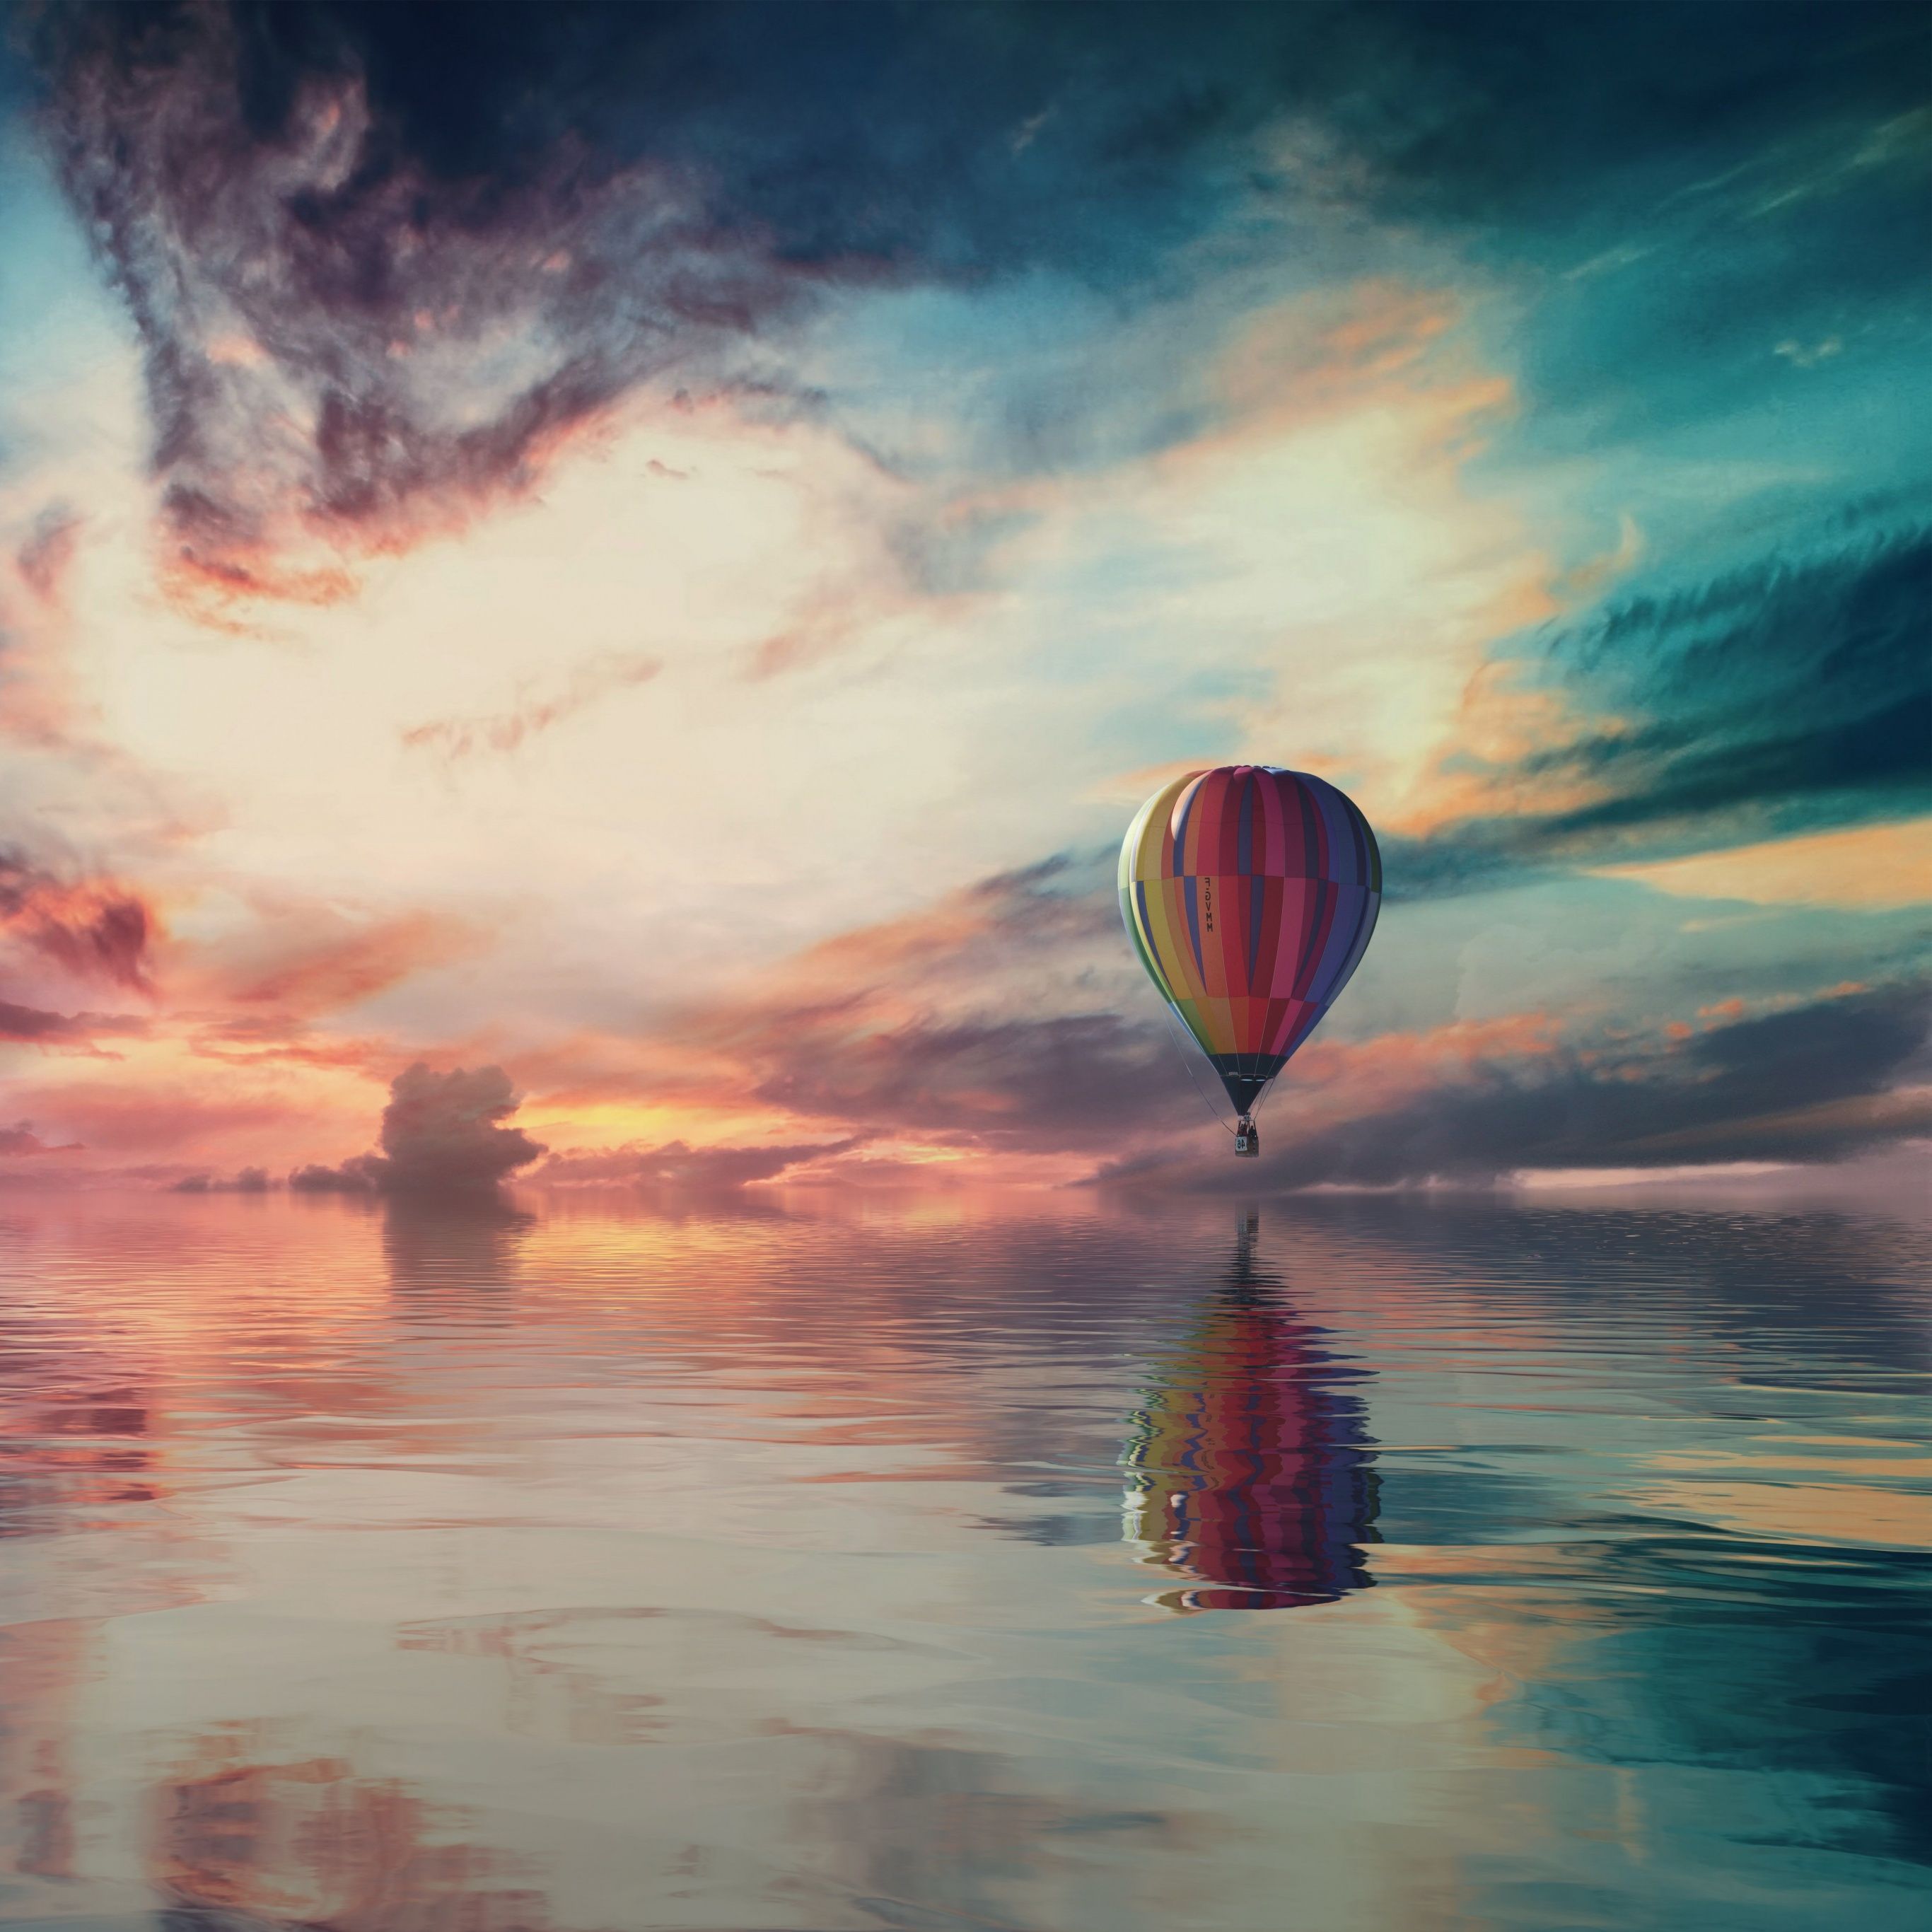 A hot air balloon floating over a body of water with a sunset in the background - Hot air balloons